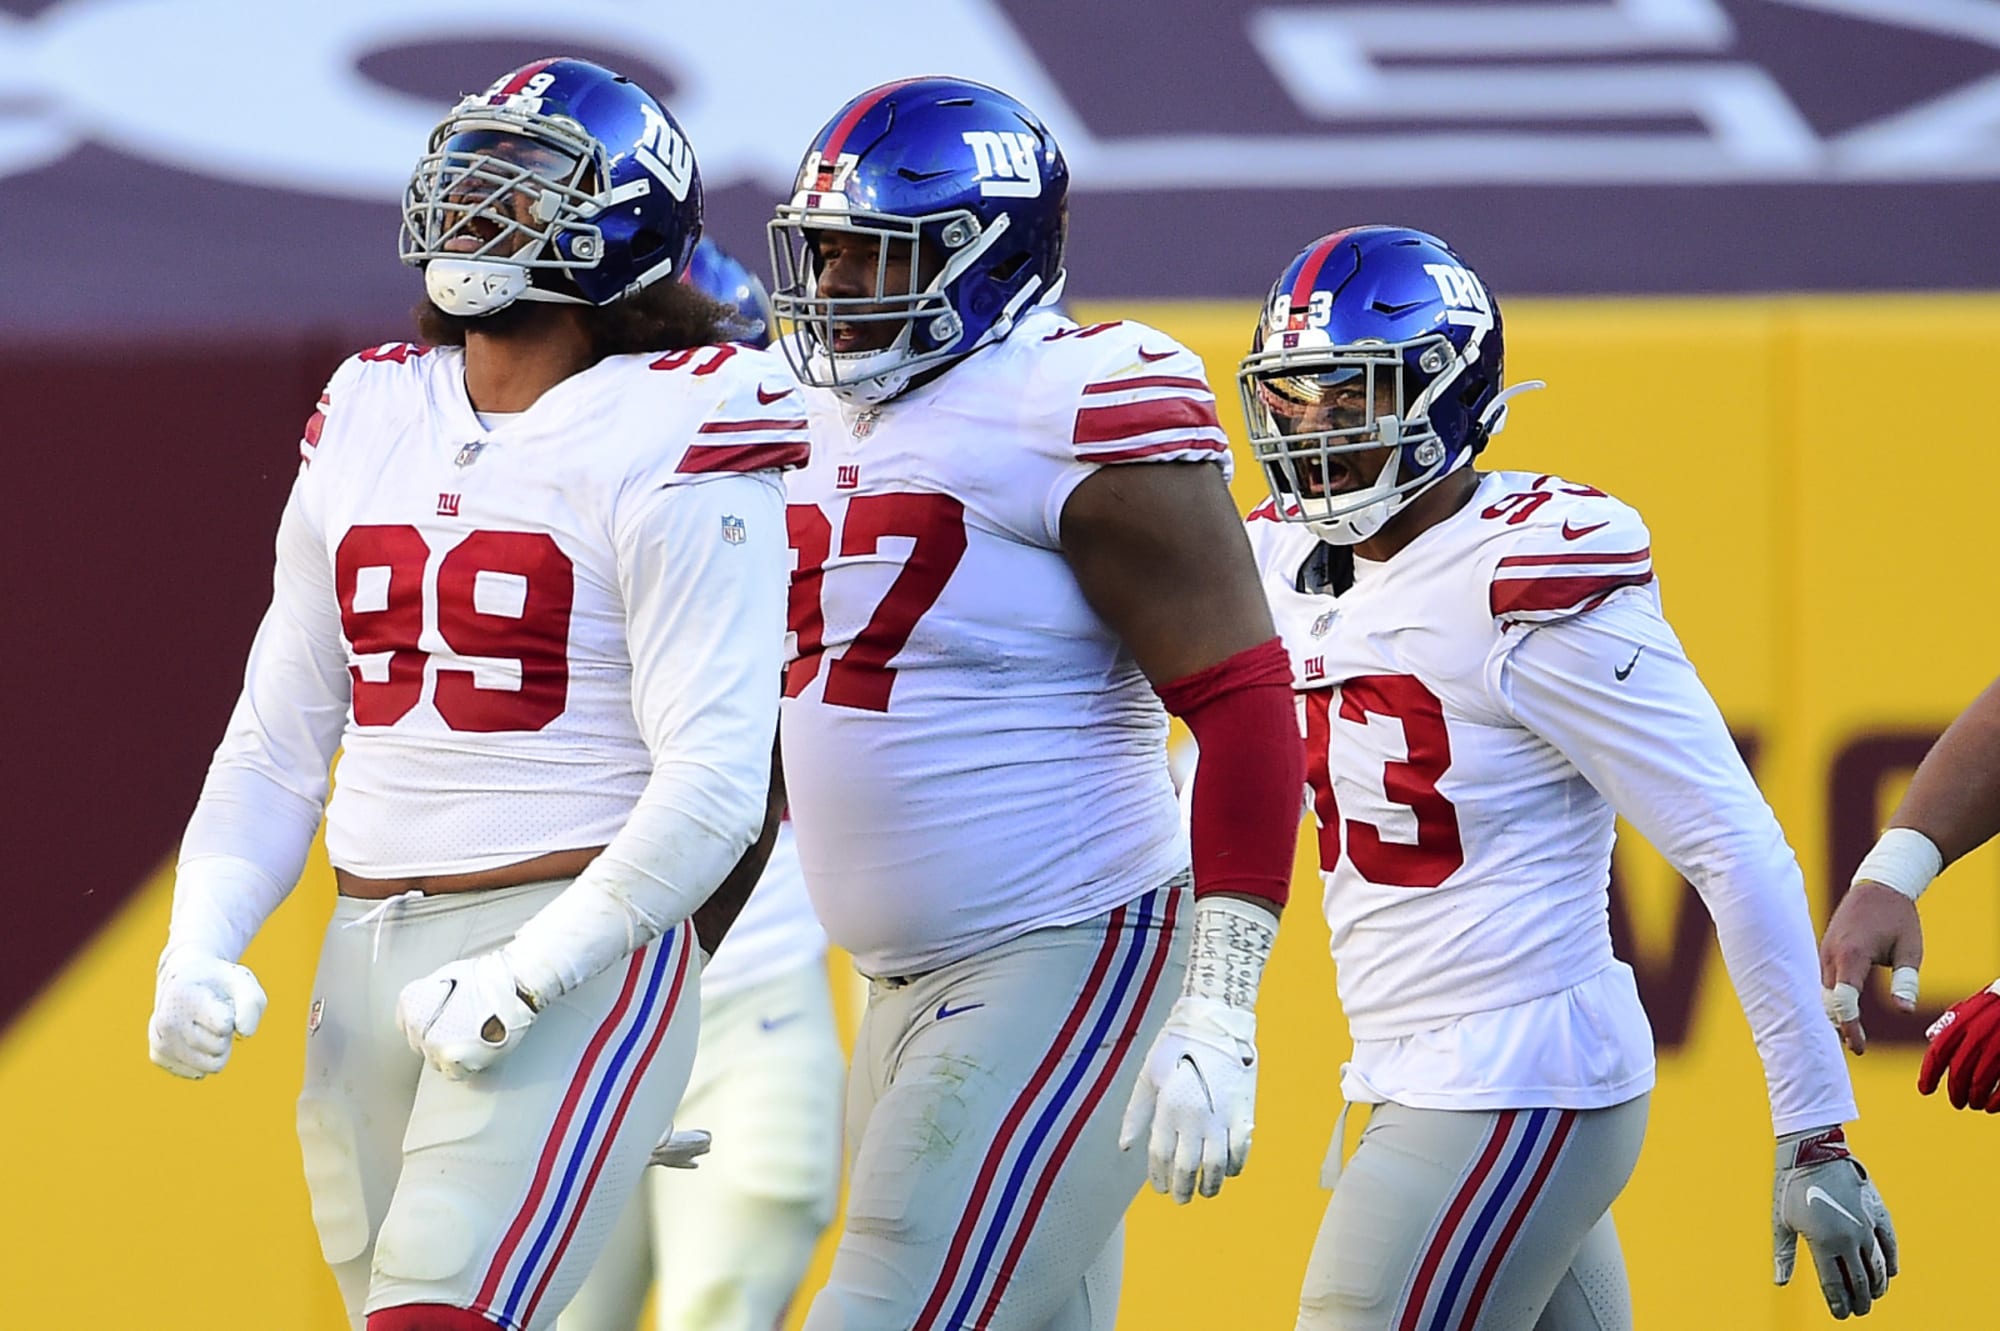 Where will NY Giants' sacks come from in 2021 season? Page 6